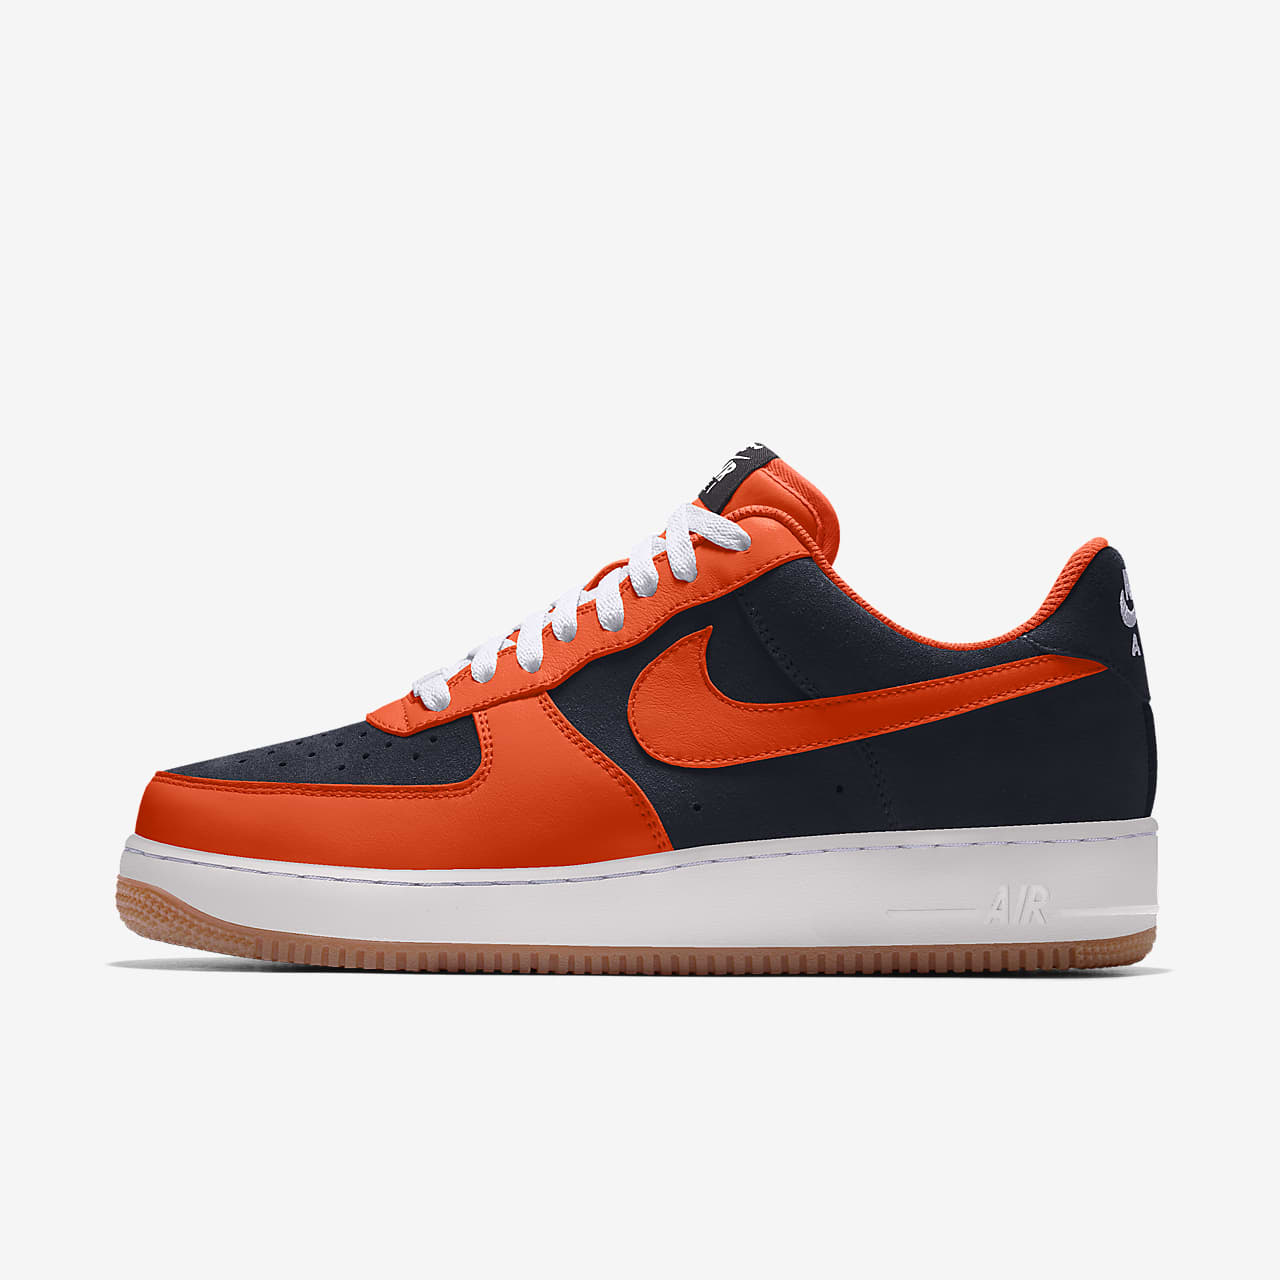 chaussure femme nike air force 1 orange,Chaussure personnalisable Nike Air Force 1 Low By You pour Femme